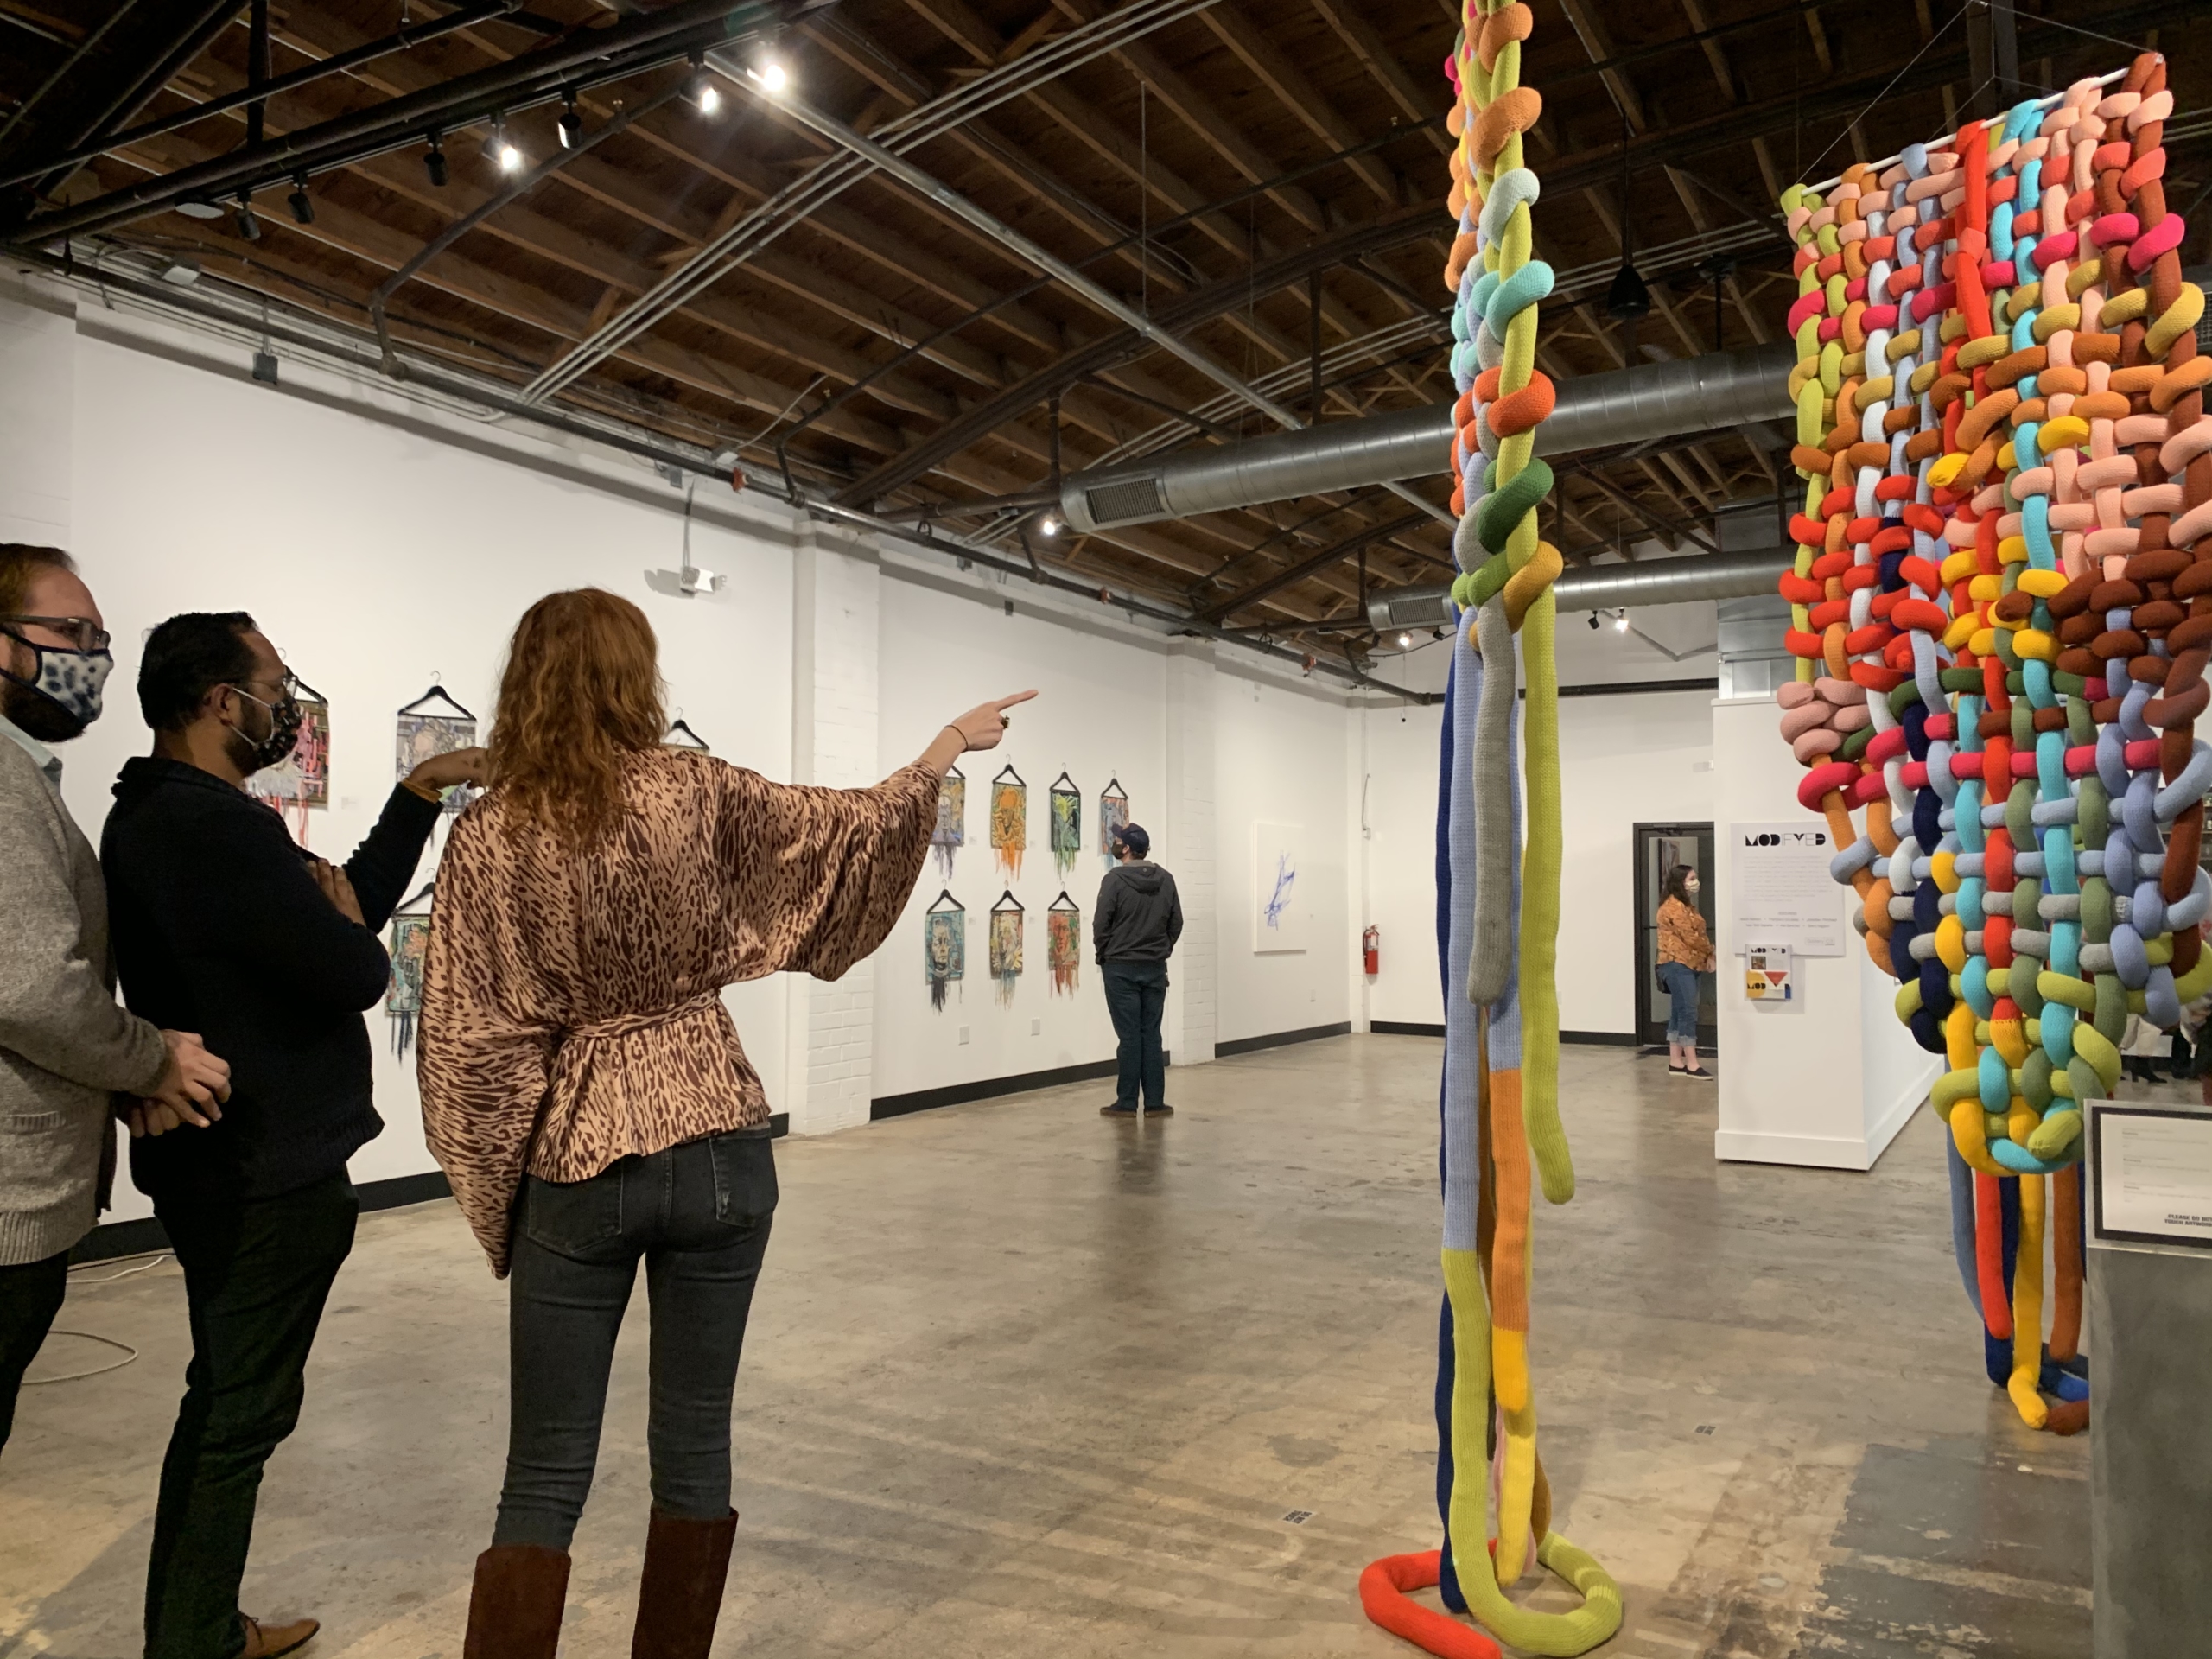 Sharon Dowell curating textile art Modified Exhibition for Gallery c3 in Charlotte, NC.